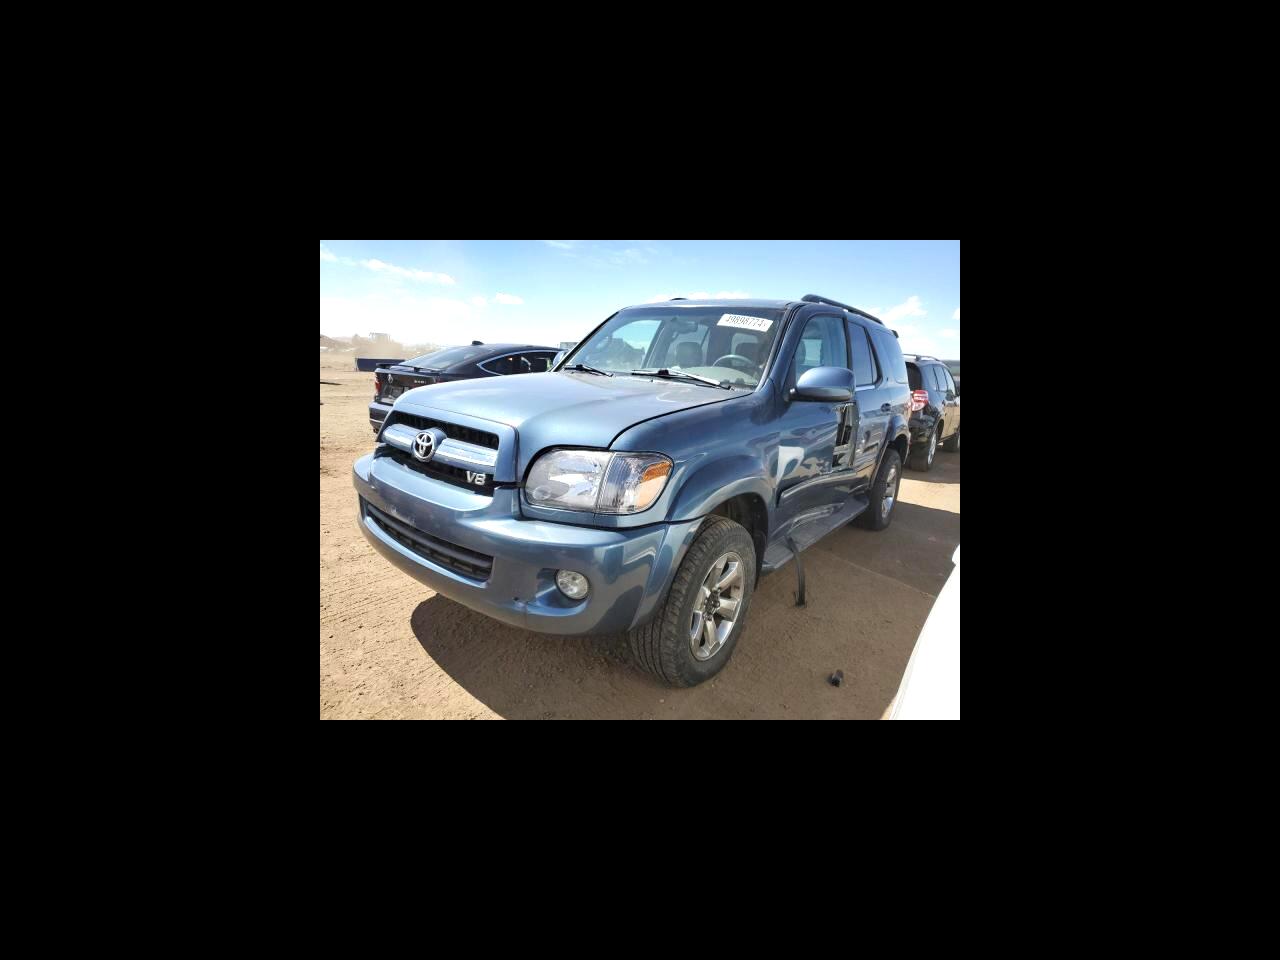 2005 Toyota Sequoia 4dr Limited 4WD (Natl)